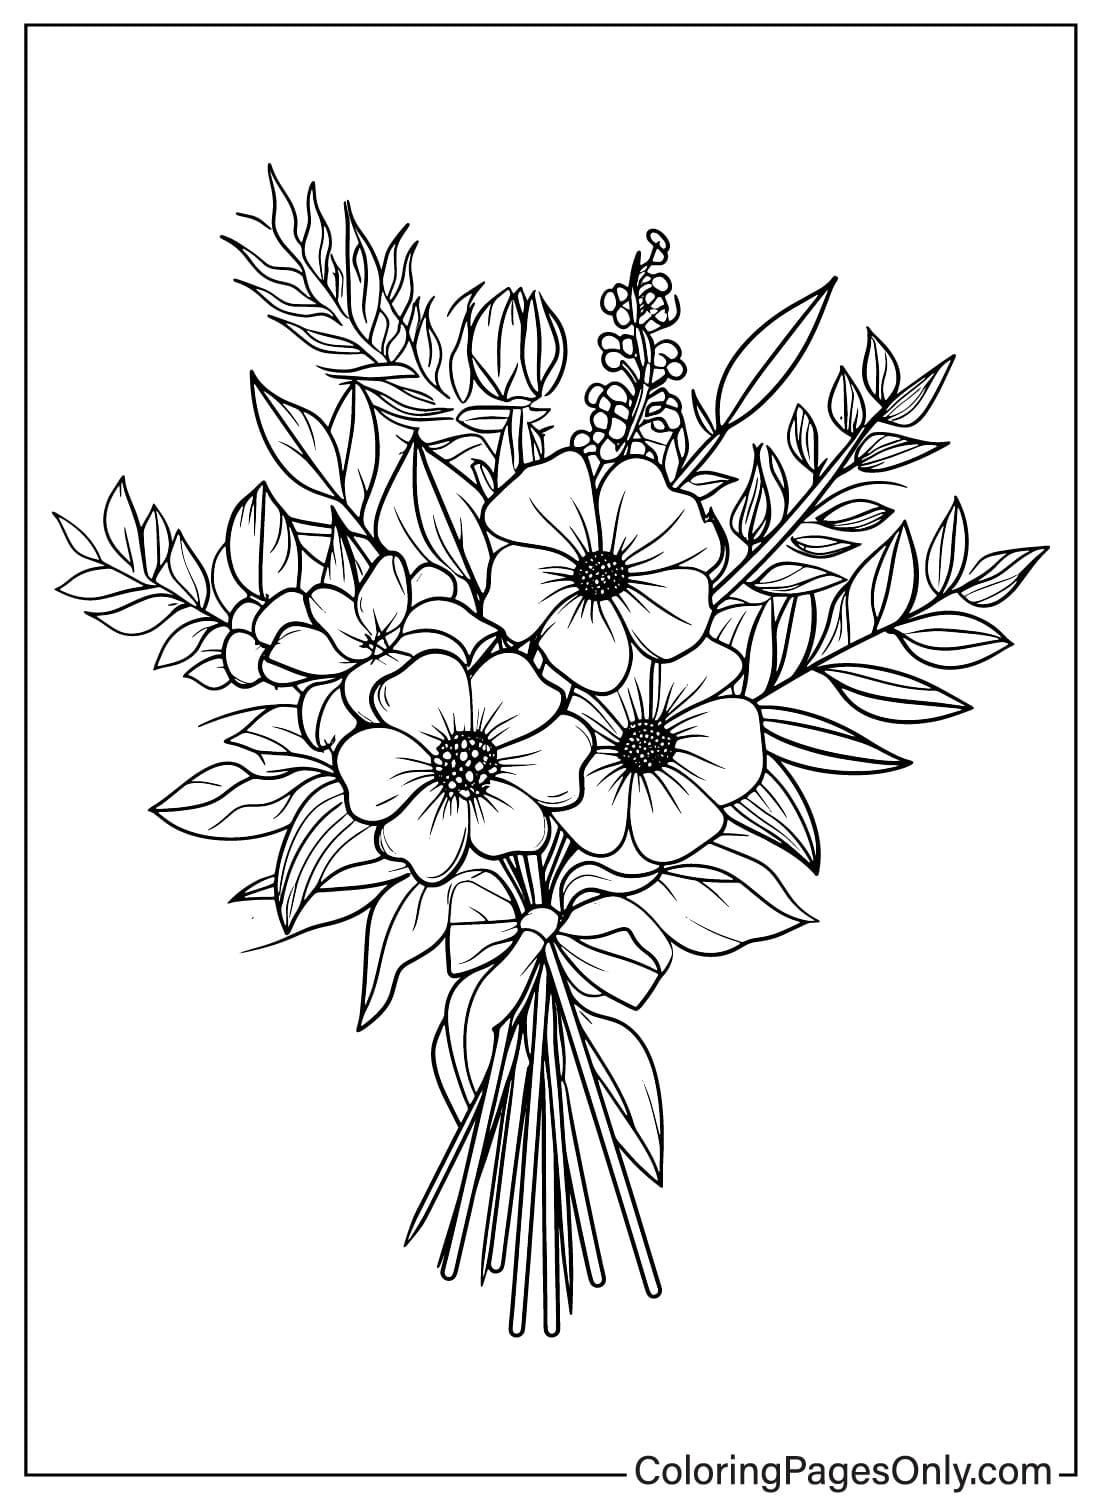 Flower Bouquet Coloring Sheet for Kids Coloring Page